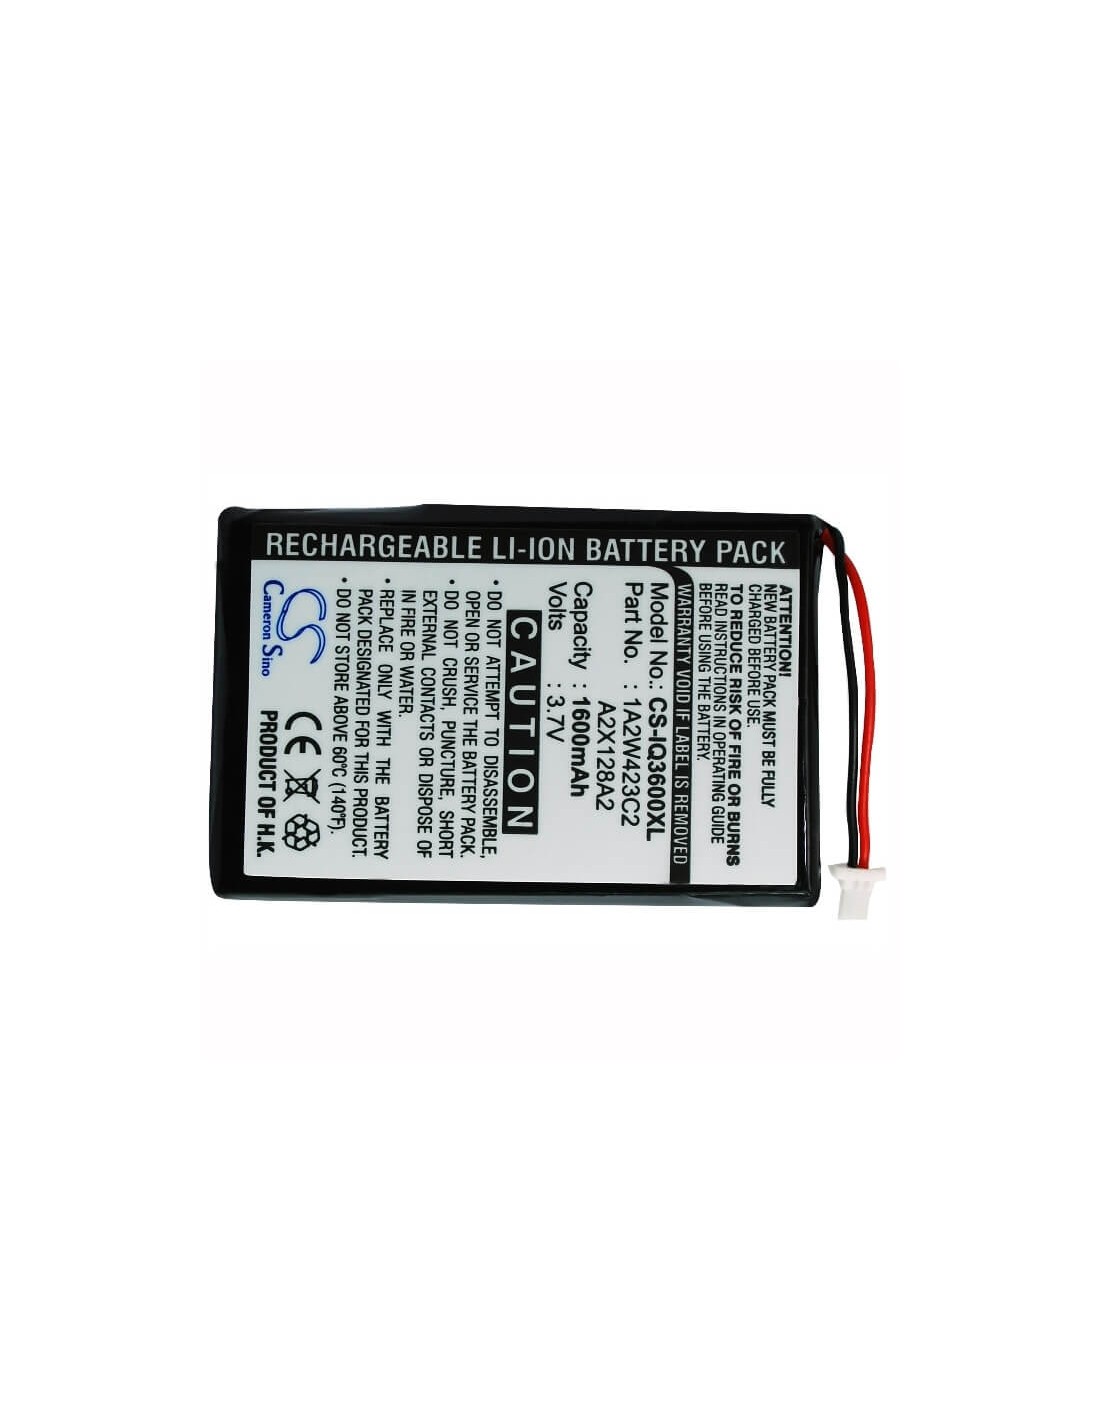 Battery for Garmin Ique 3200, Ique 3600, Ique 3600a 3.7V, 1600mAh - 5.92Wh